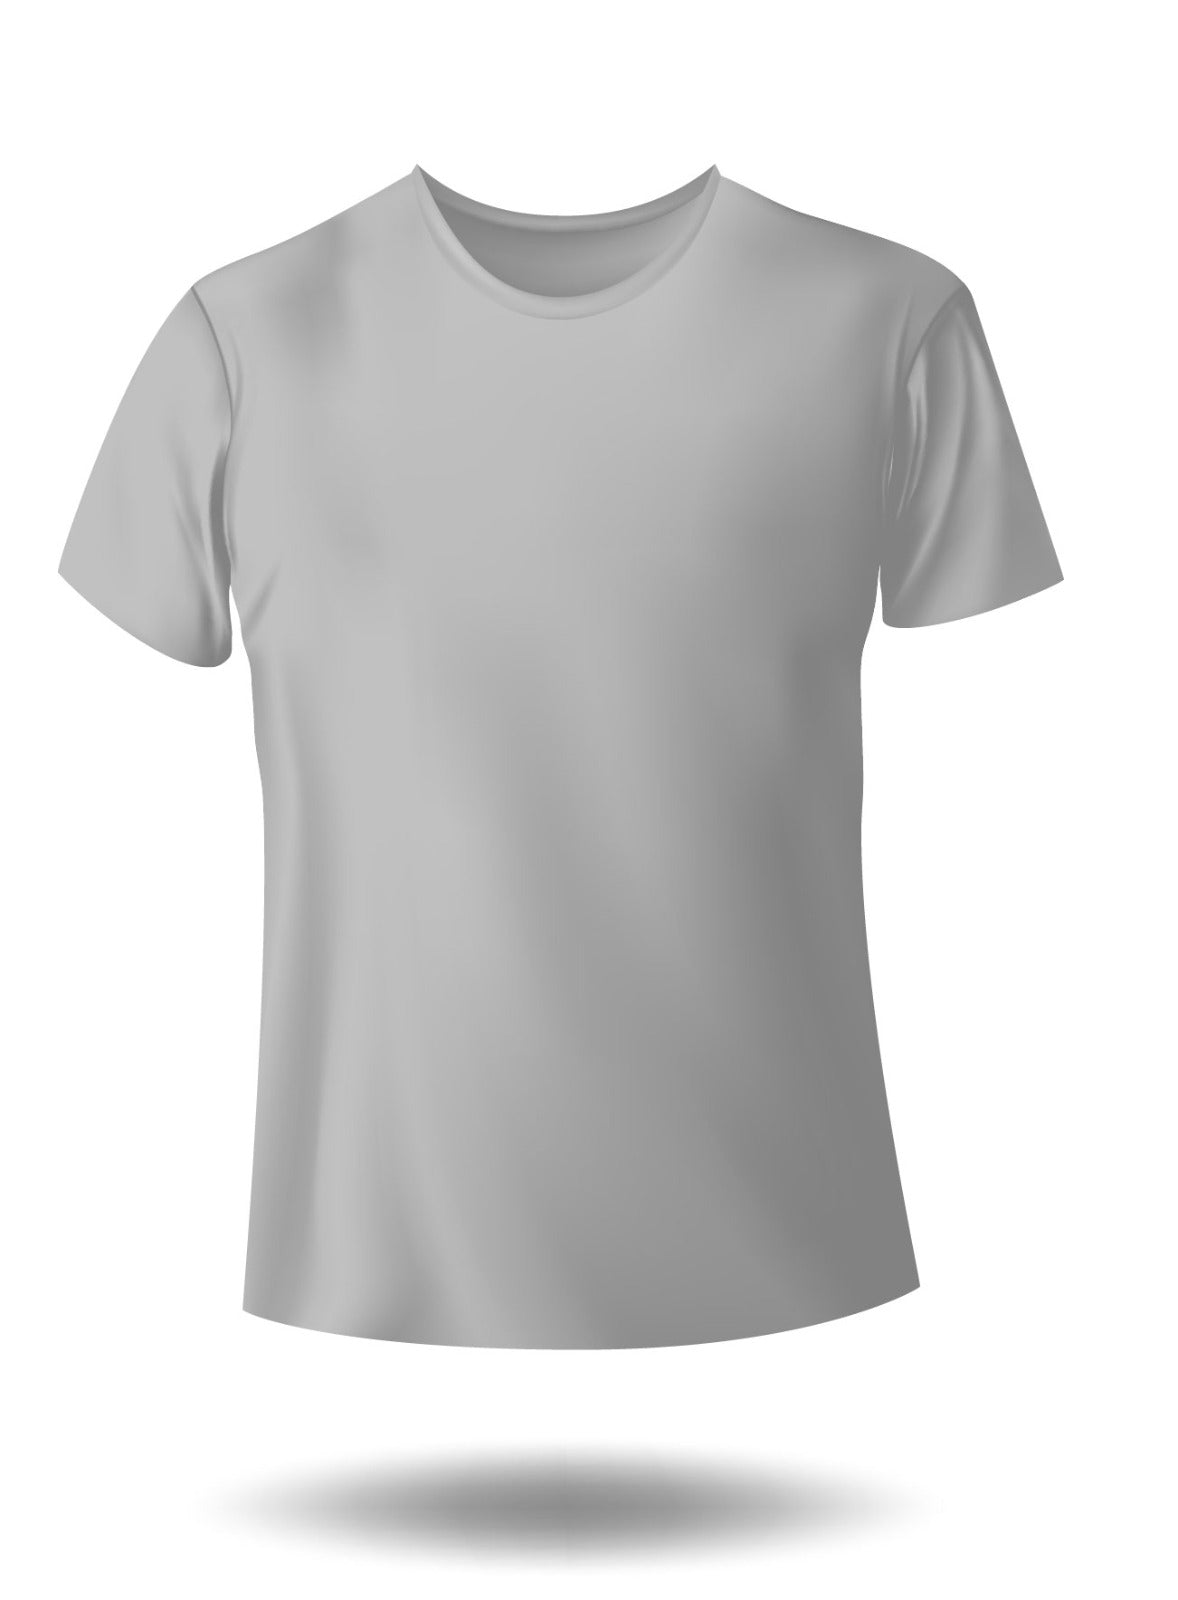 grey t-shirt for kids